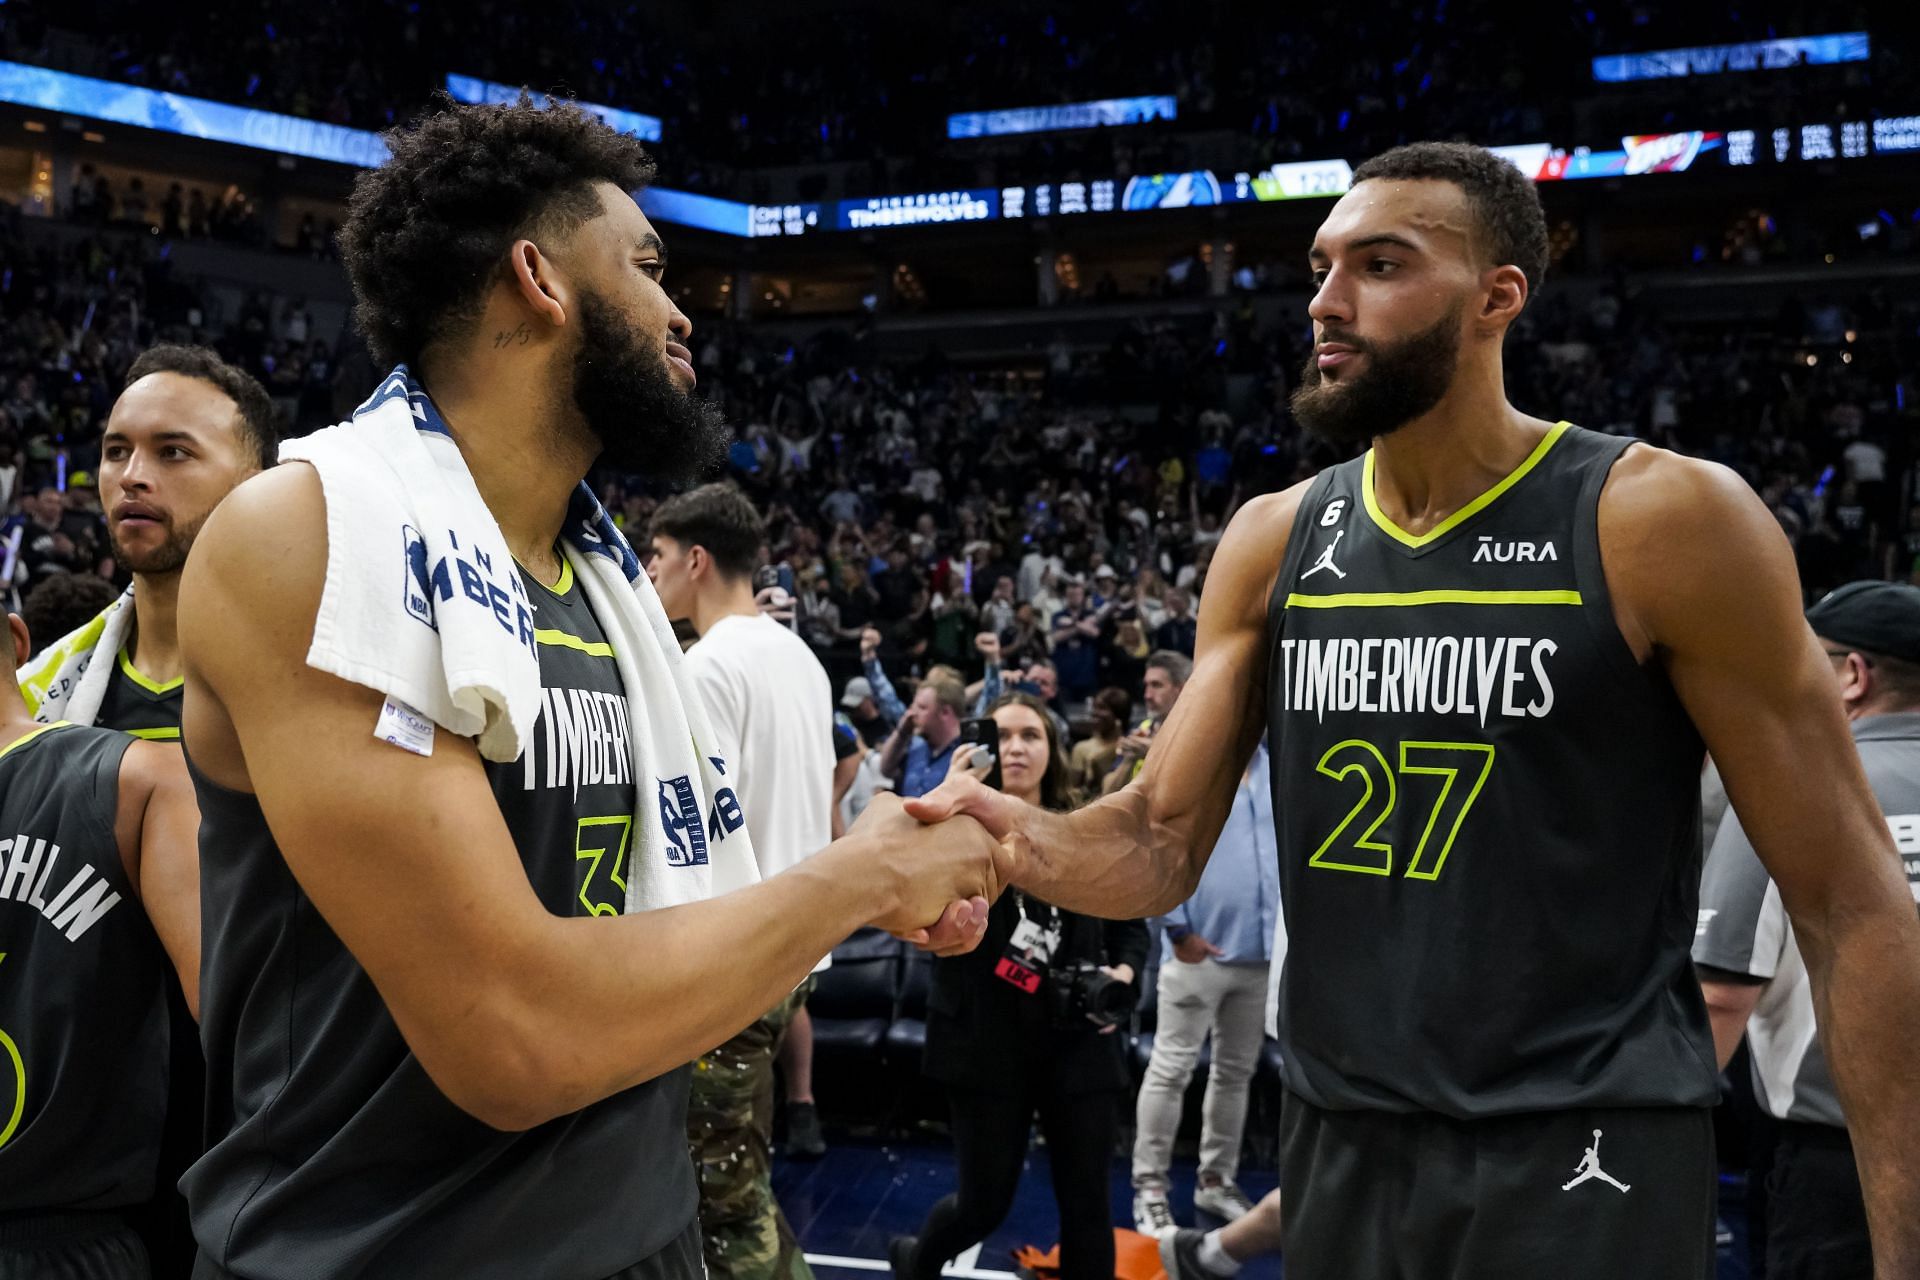 Karl-Anthony Towns and Rudy Gobert have been disappointing in the series between the Minnesota Timberwolves and Denver Nuggets.